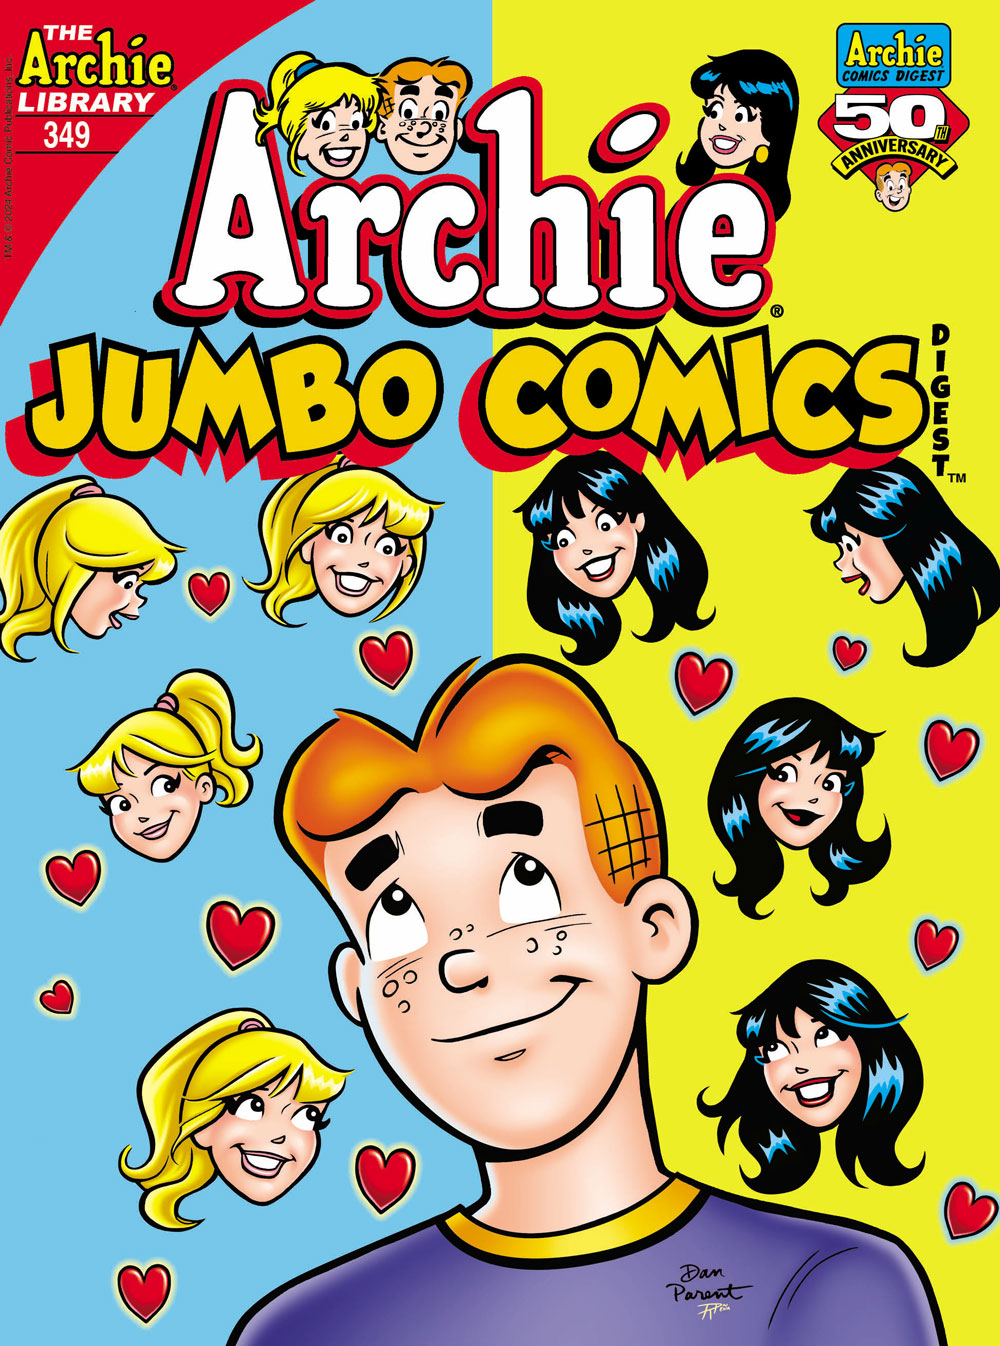 Archie looks up at a cloud of images of Betty and Veronica, all floating above his head with hearts.